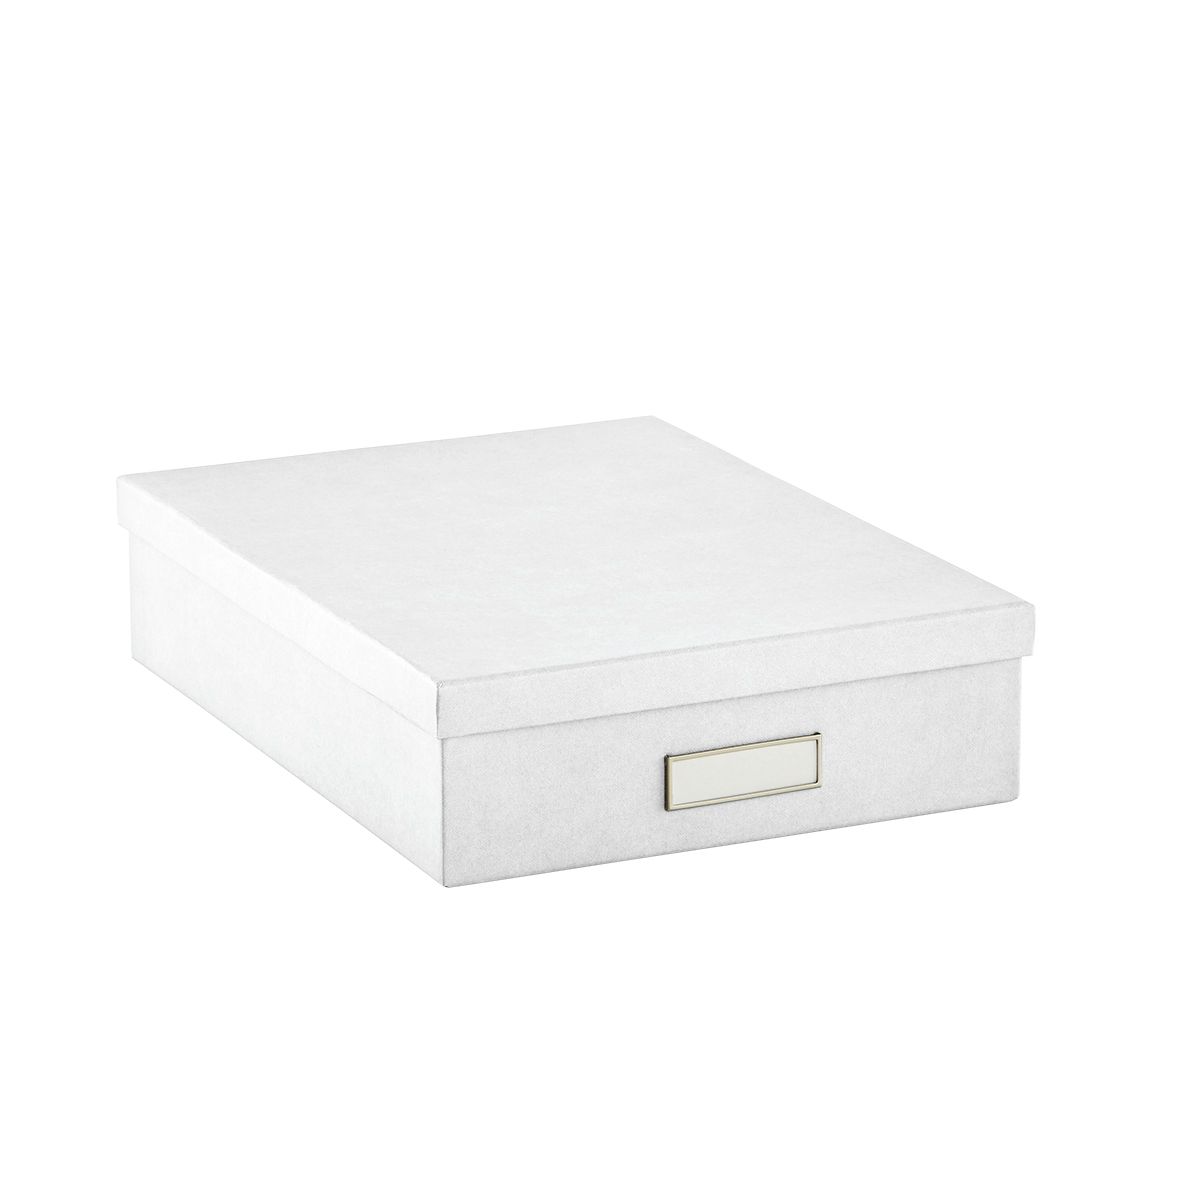 Bigso Stockholm Letter Box White | The Container Store